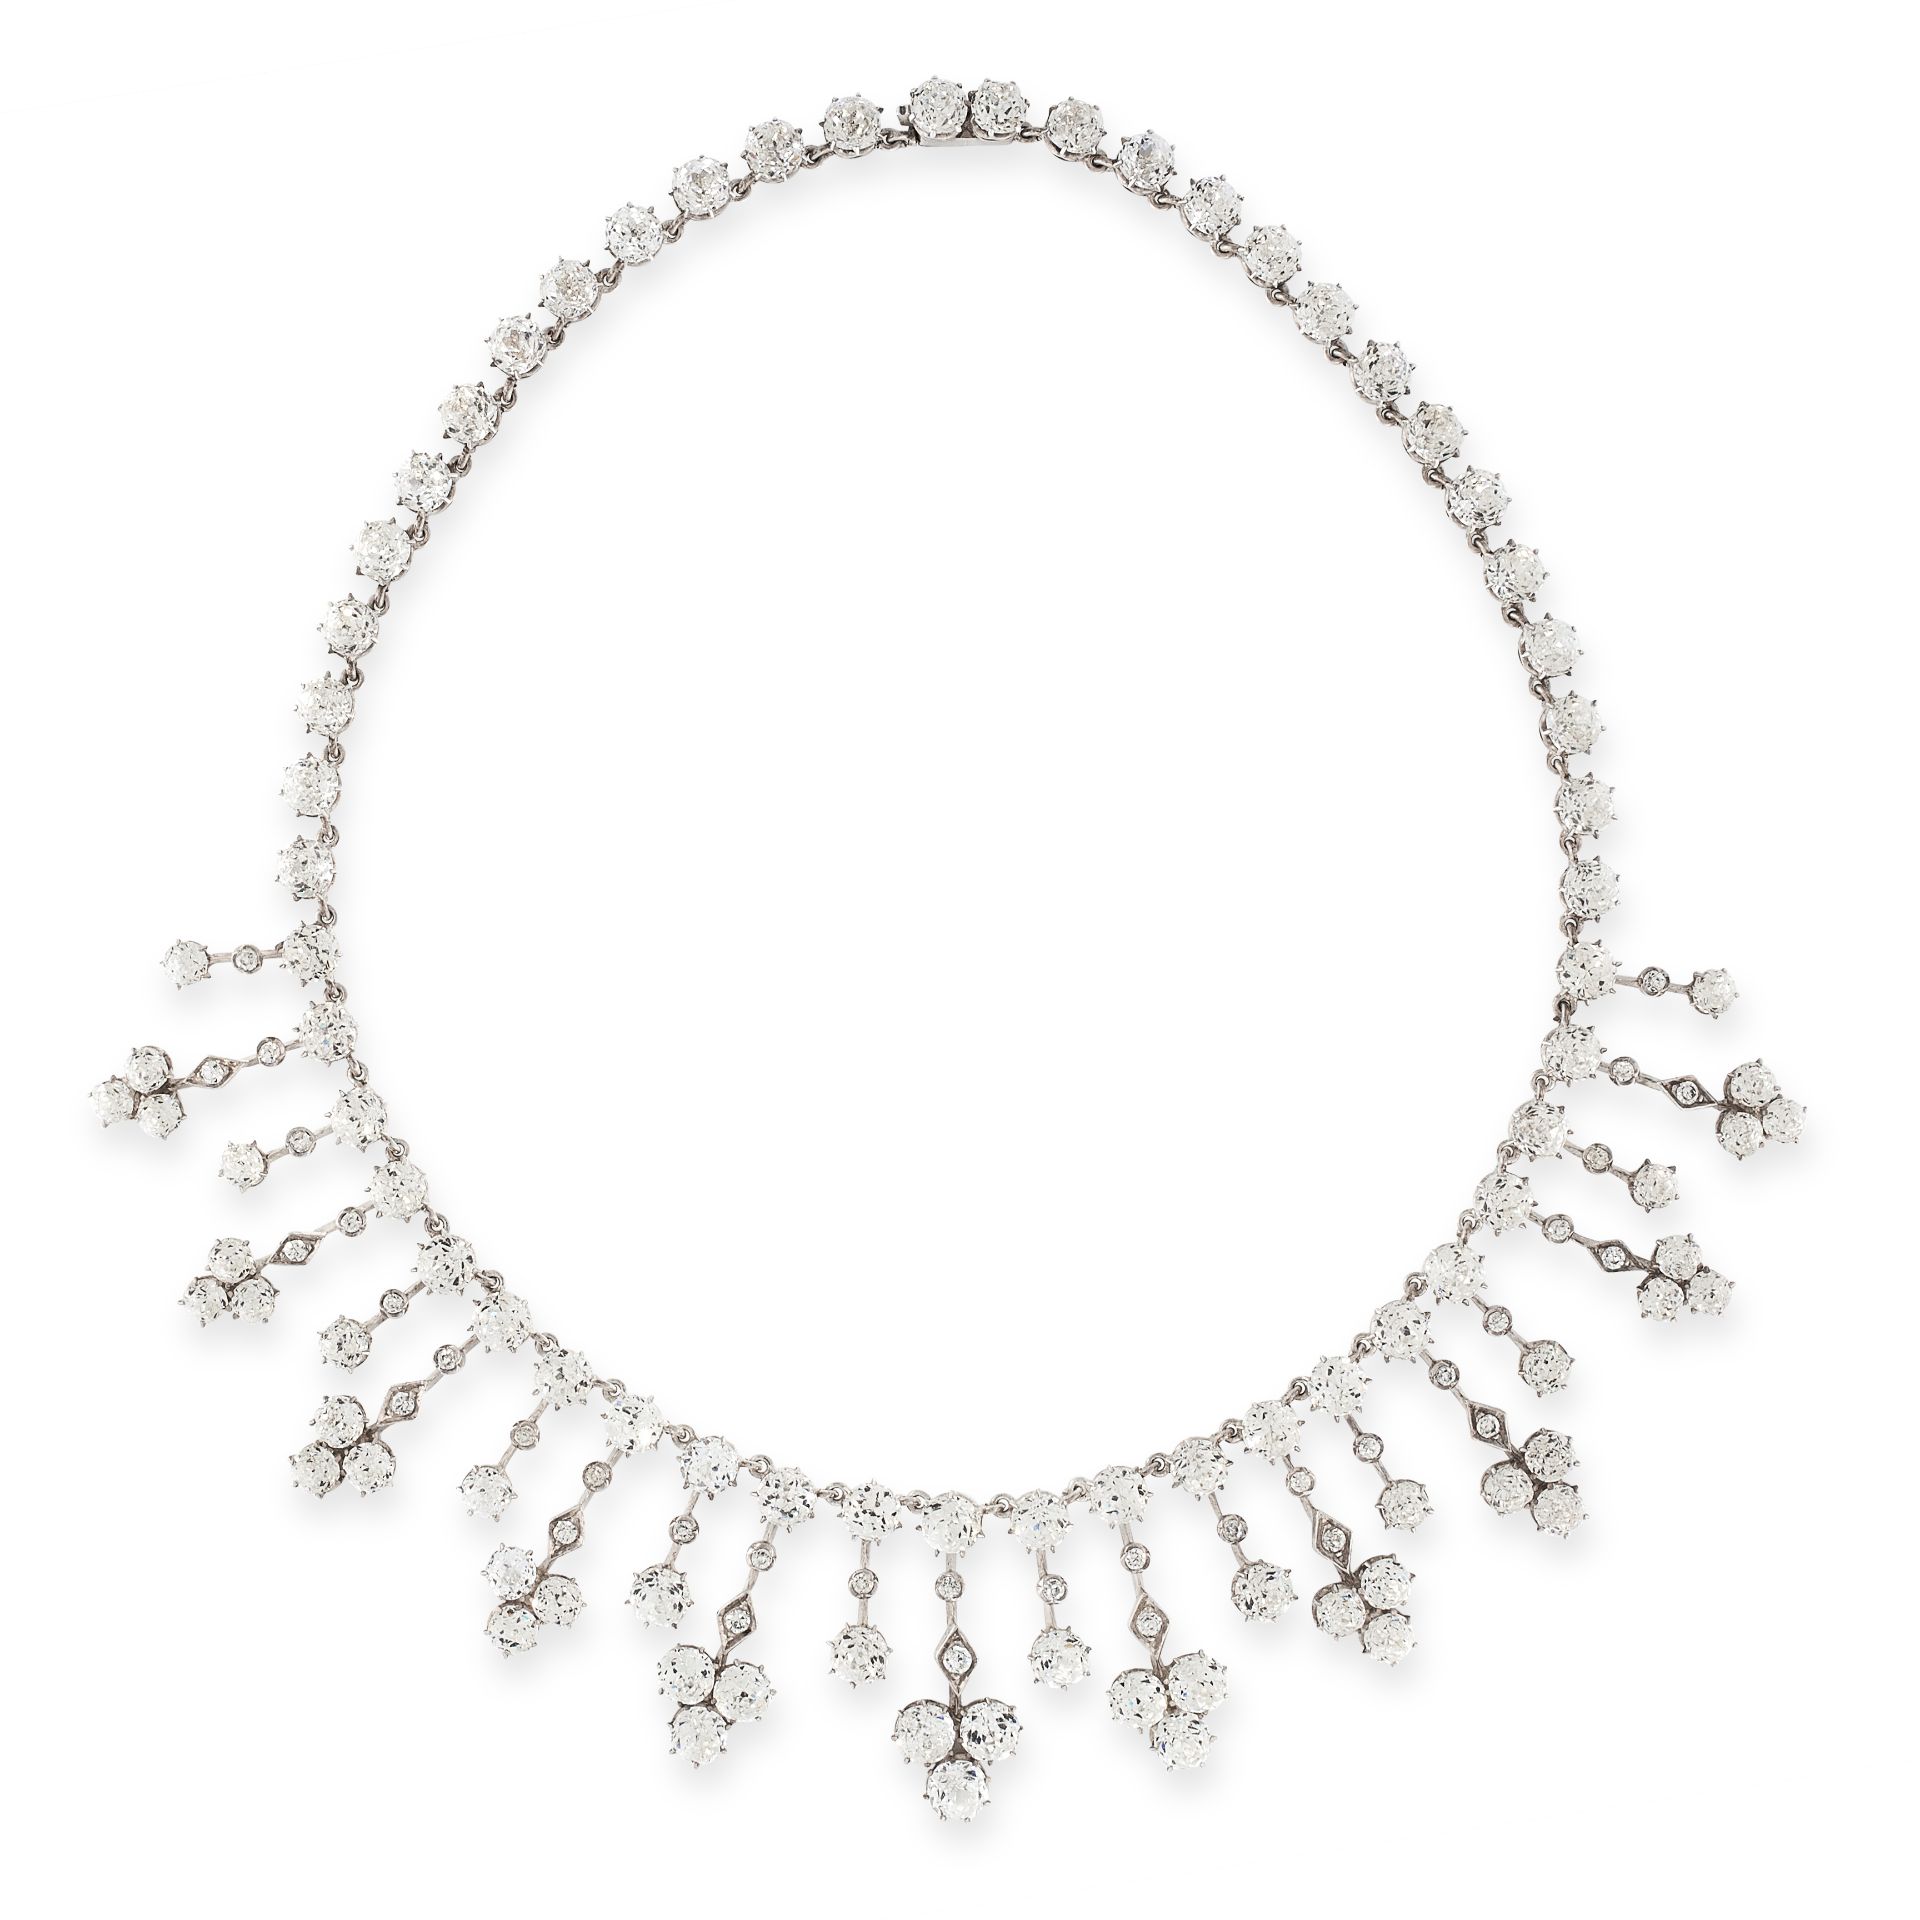 A PASTE DIAMOND RIVIERE NECKLACE in silver, comprising a row of fifty-one old cut paste gemstones,